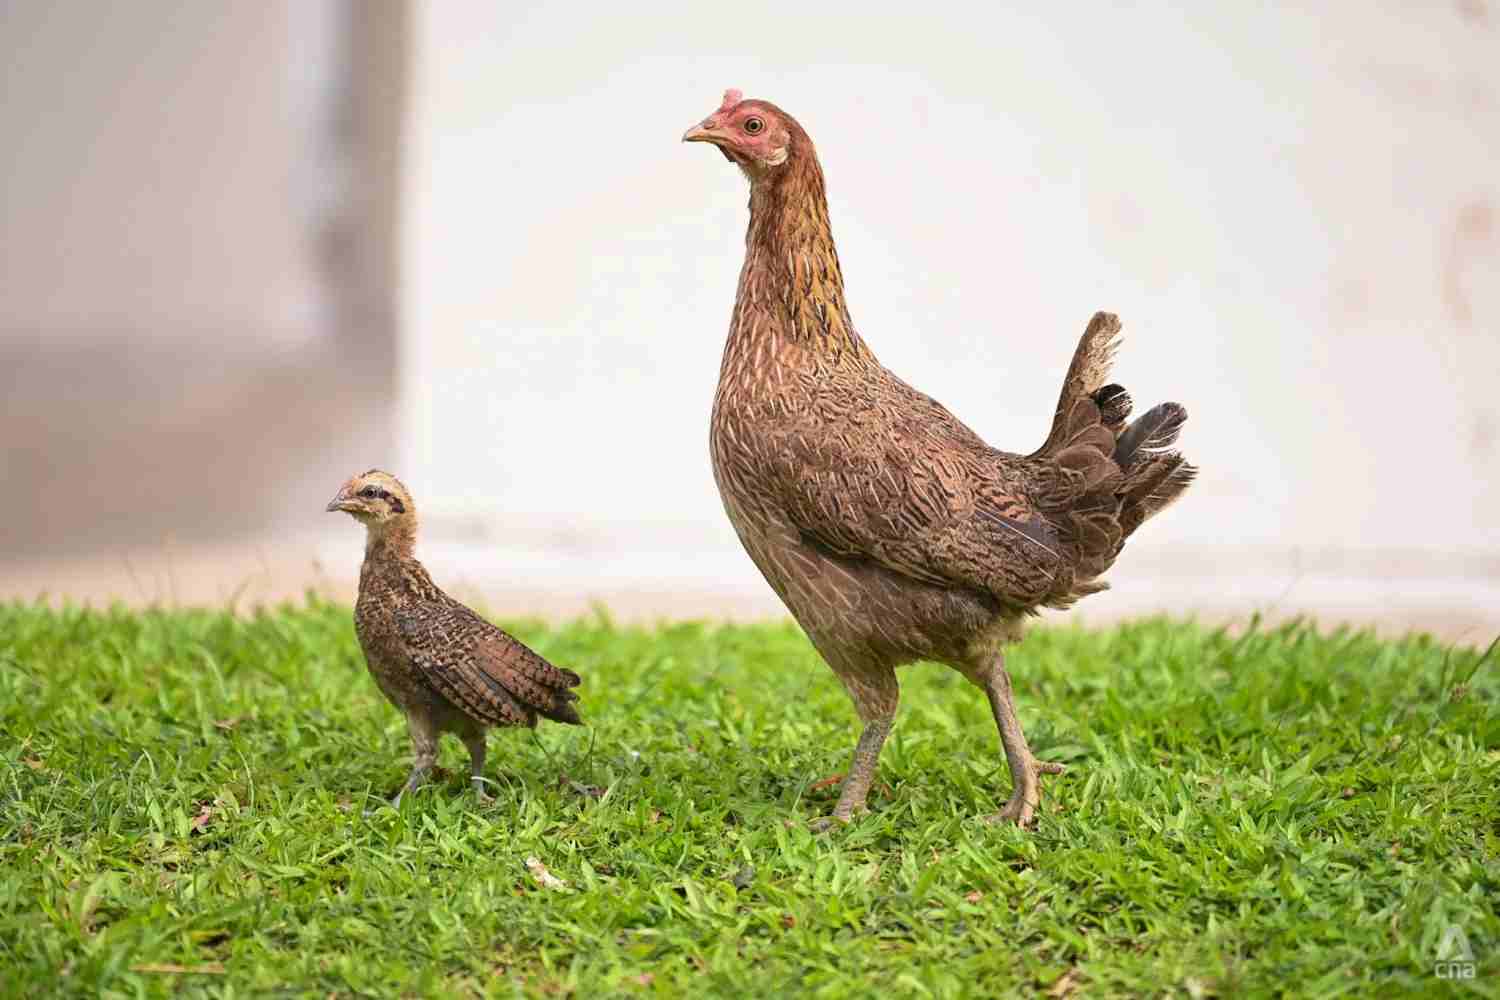 Keeping of poultry in HDB flats not allowed due to public health reasons: Tan Kiat How